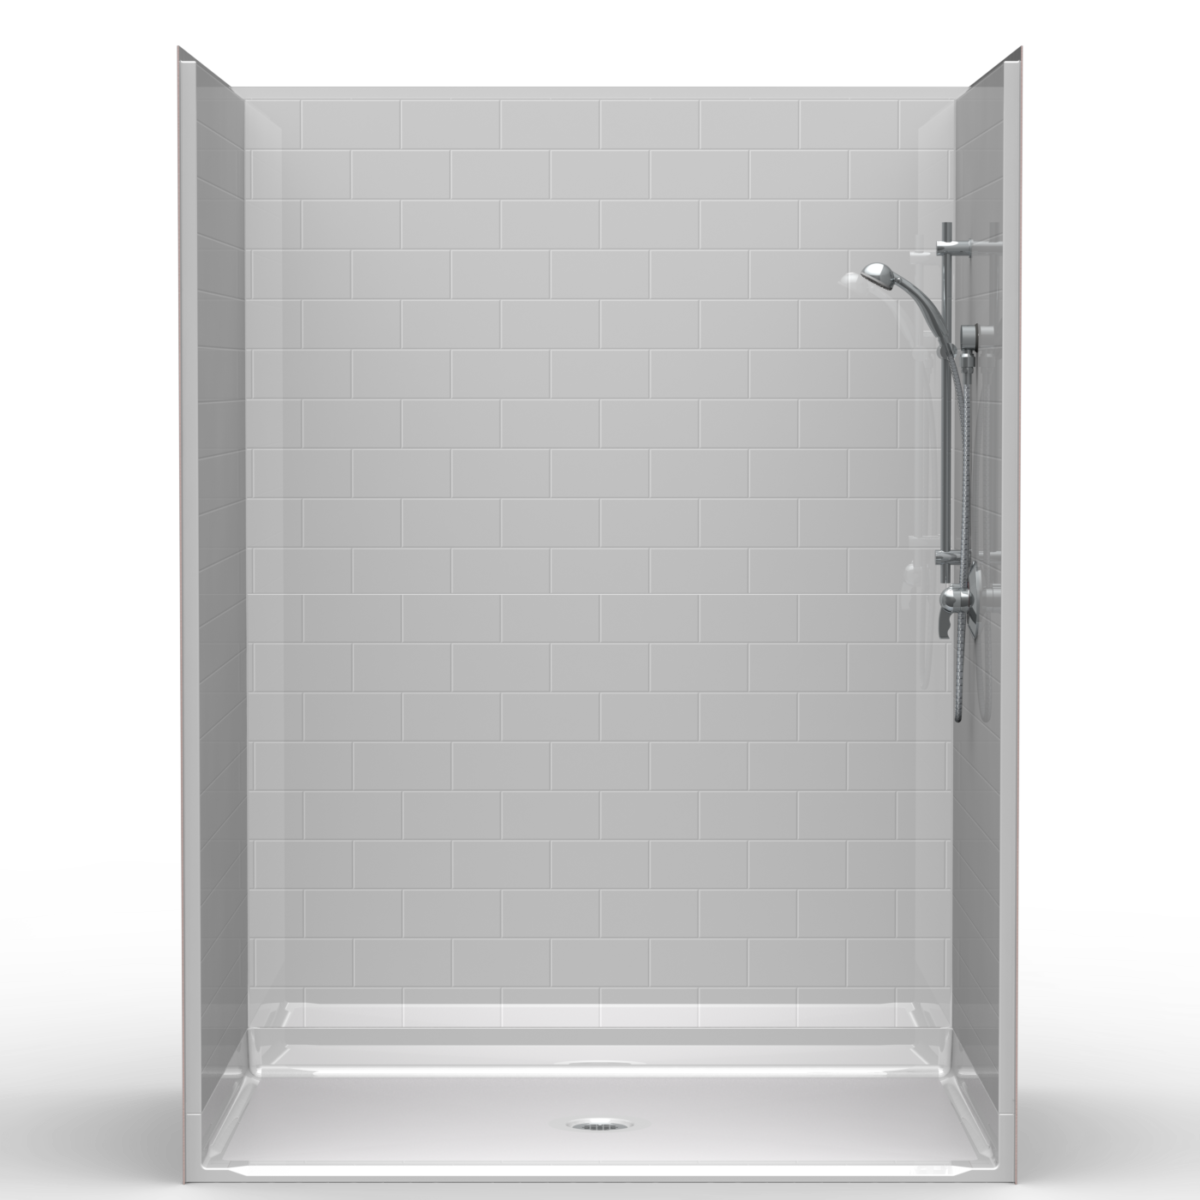 5LBS6042FB1B.V2, Five Piece 60” x 42” Roll-in Shower, 1” Threshold, Centre Drain, “Subway Tile”